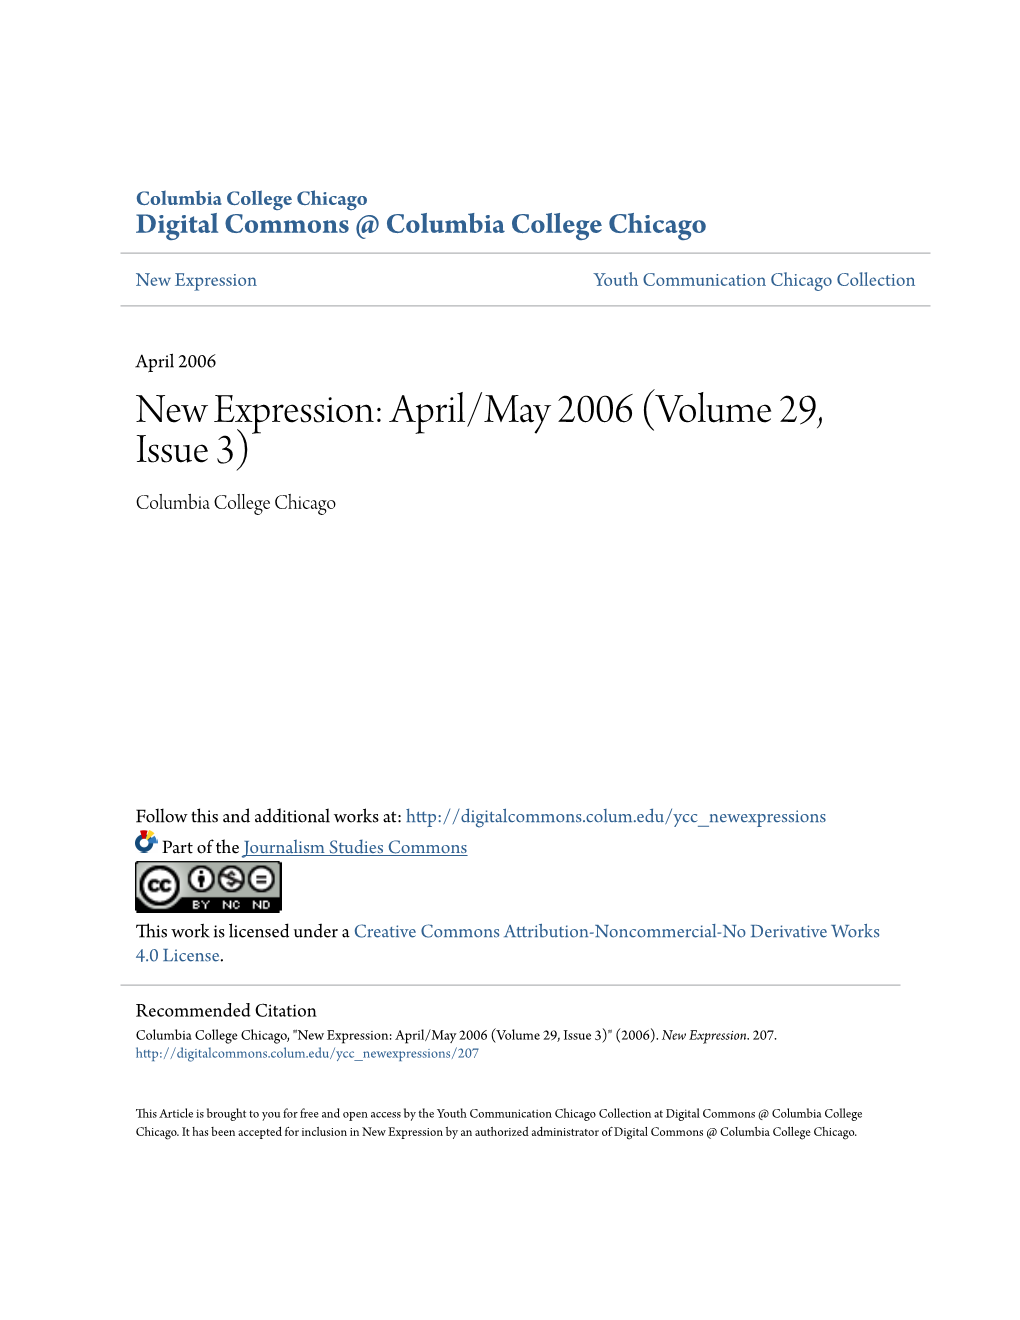 New Expression: April/May 2006 (Volume 29, Issue 3) Columbia College Chicago